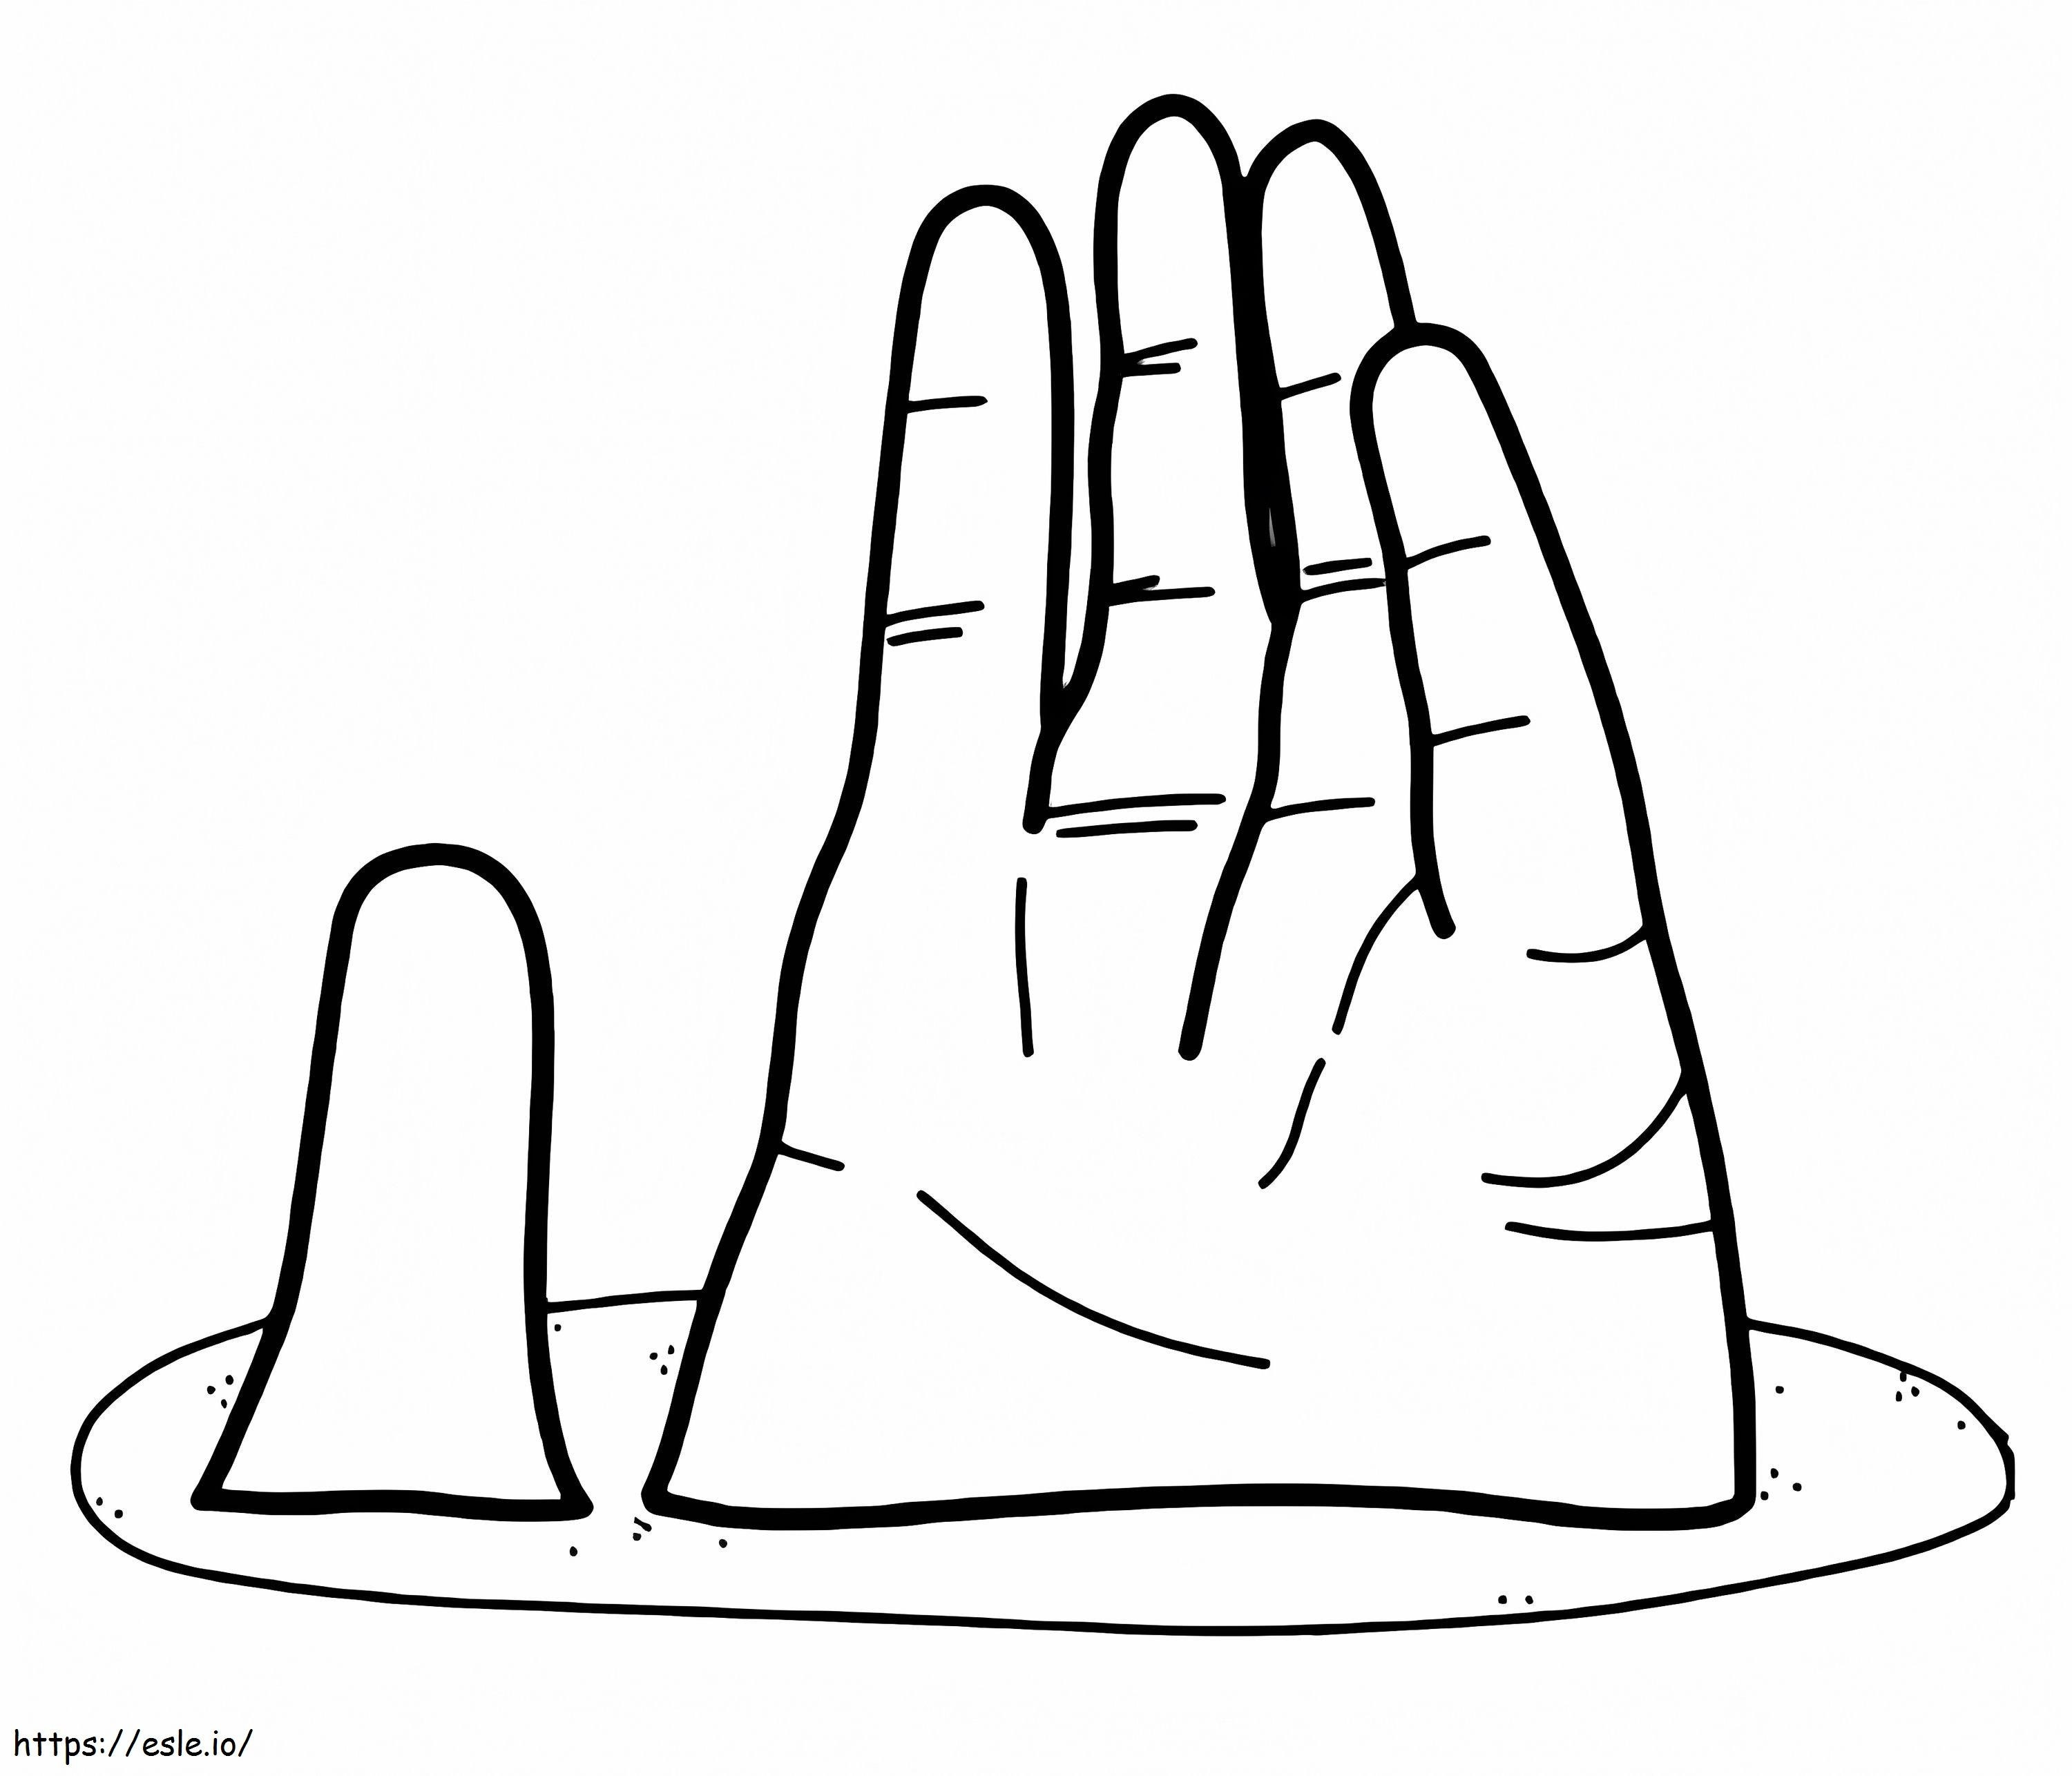 Desert Hand coloring page